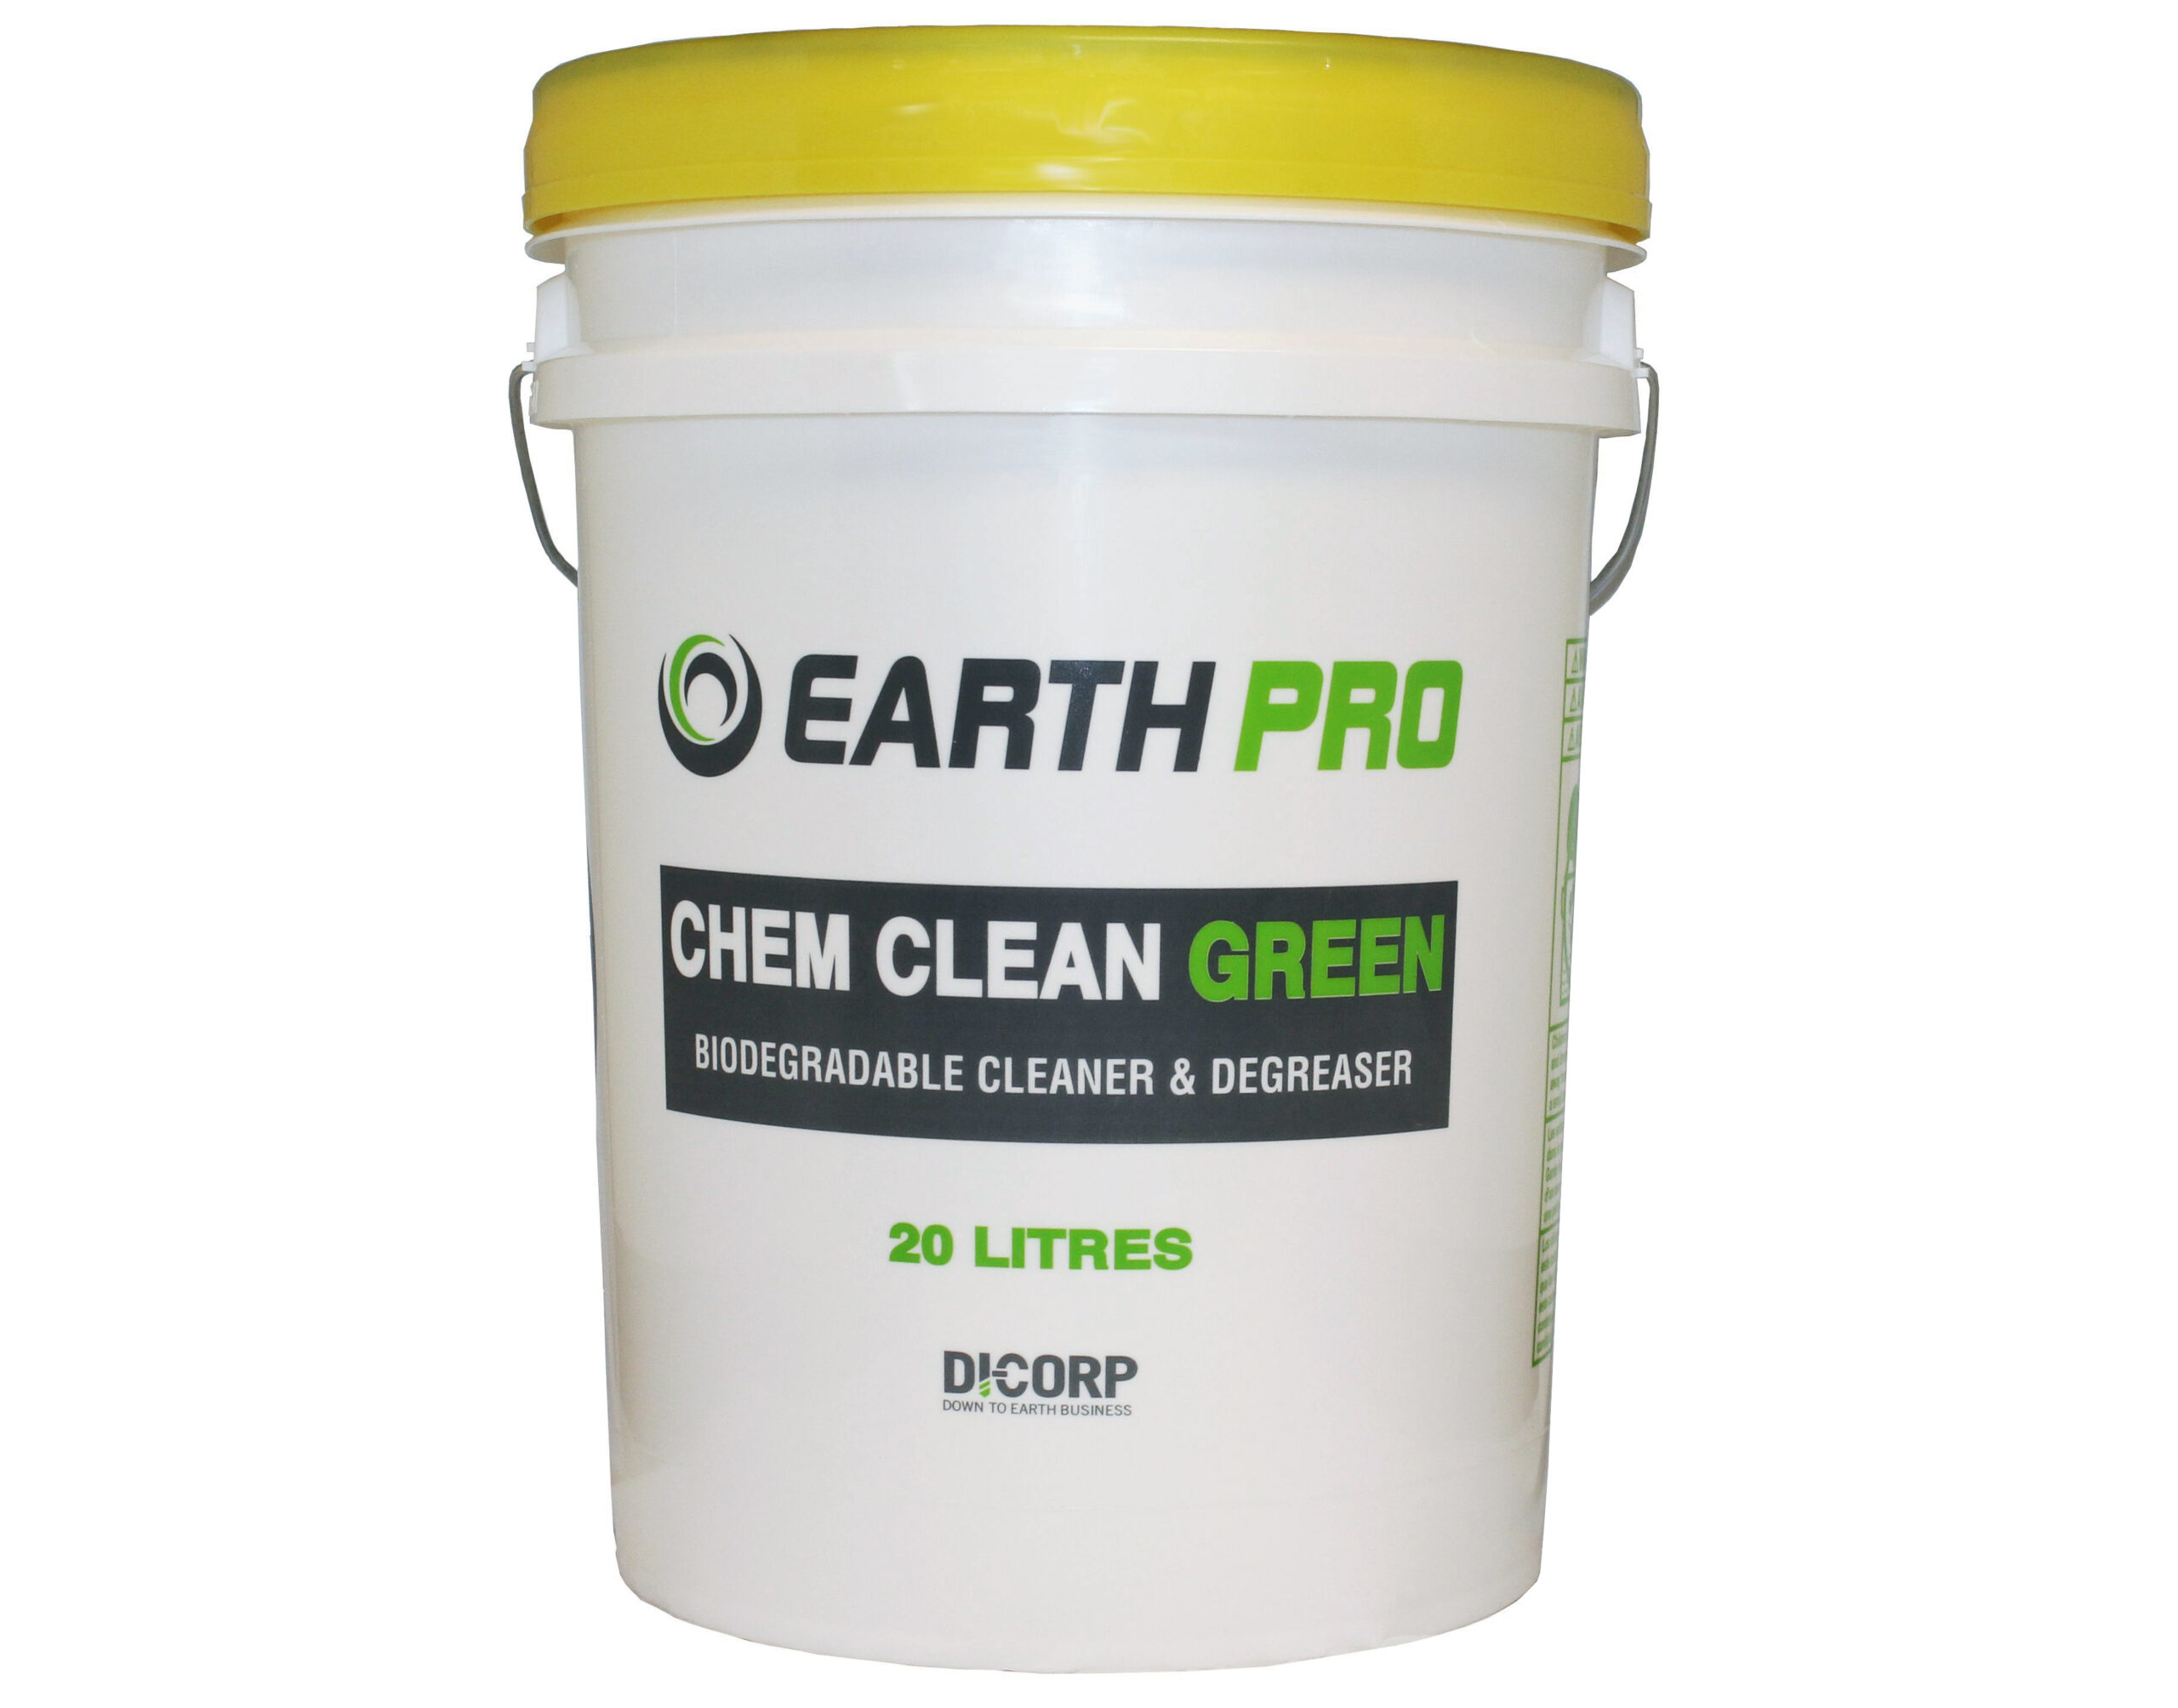 20L pail of Chem Clean Green. On the pail, a label reads “Earth Pro. Chem Clean Green Biodegradable cleaner & degreaser. 20 Litres. Di-Corp”